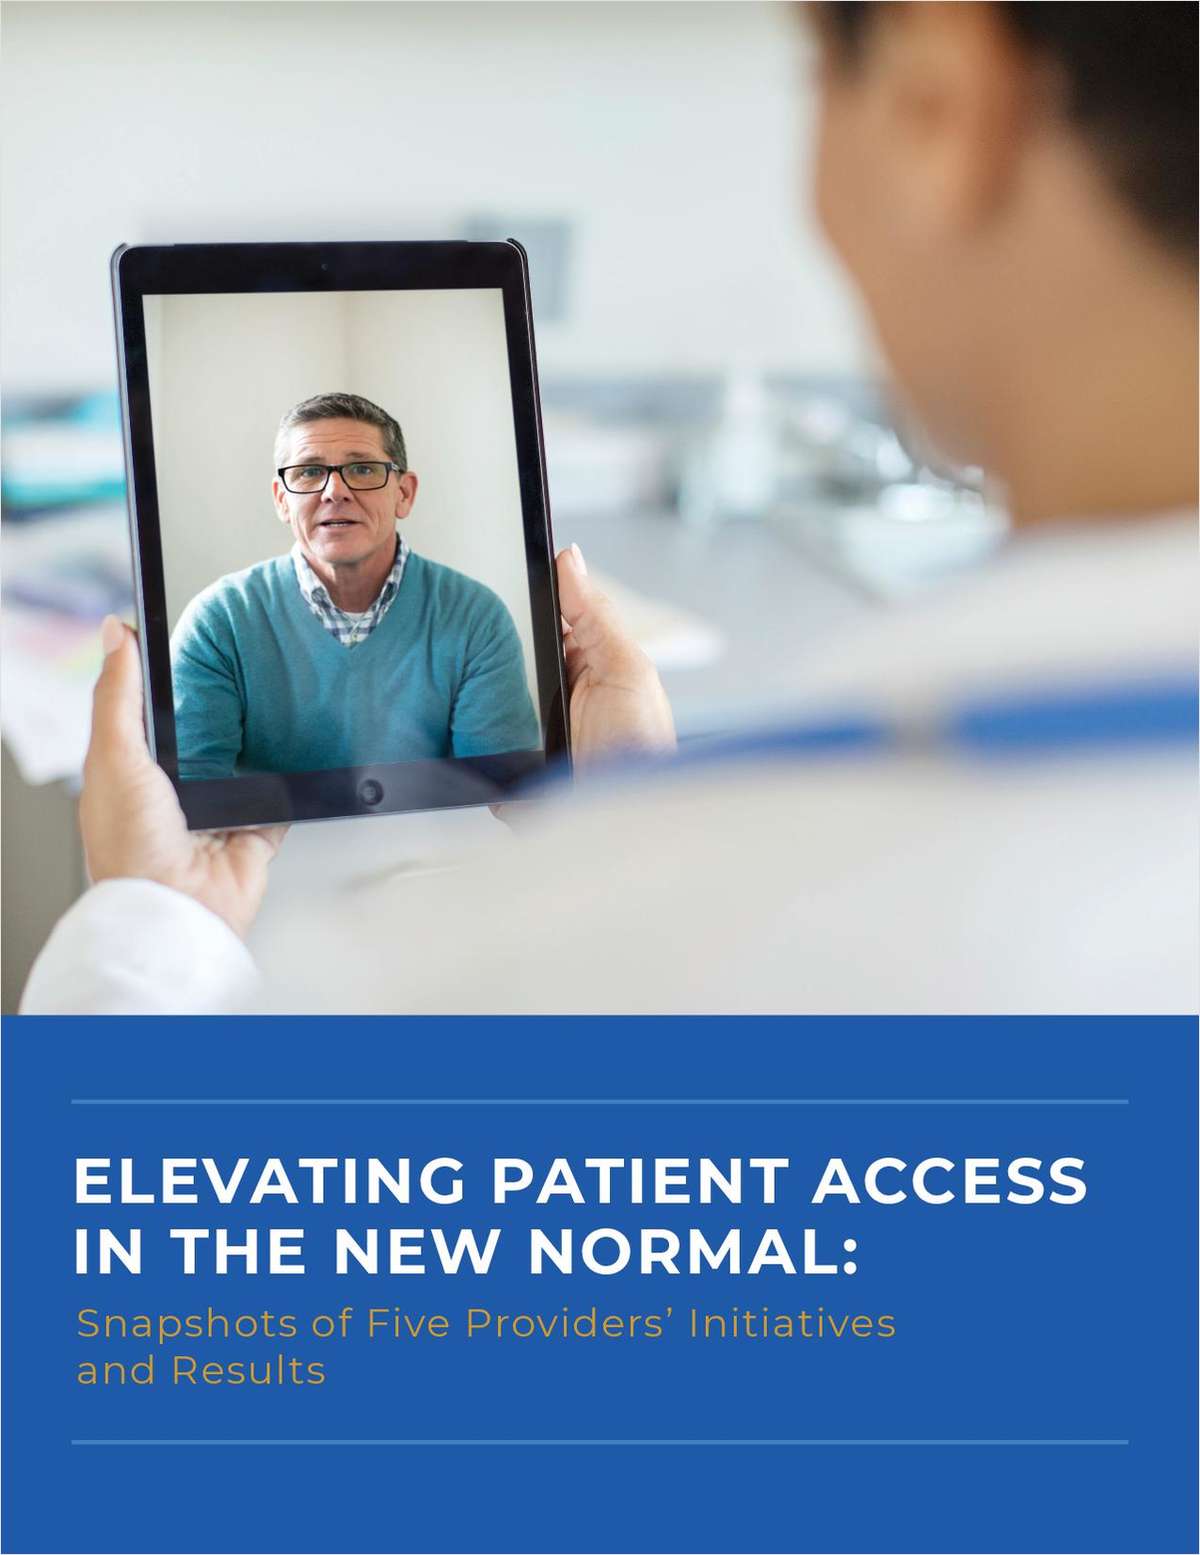 Snapshots of Five Providers' Initiatives and Results | Elevating Patient Access